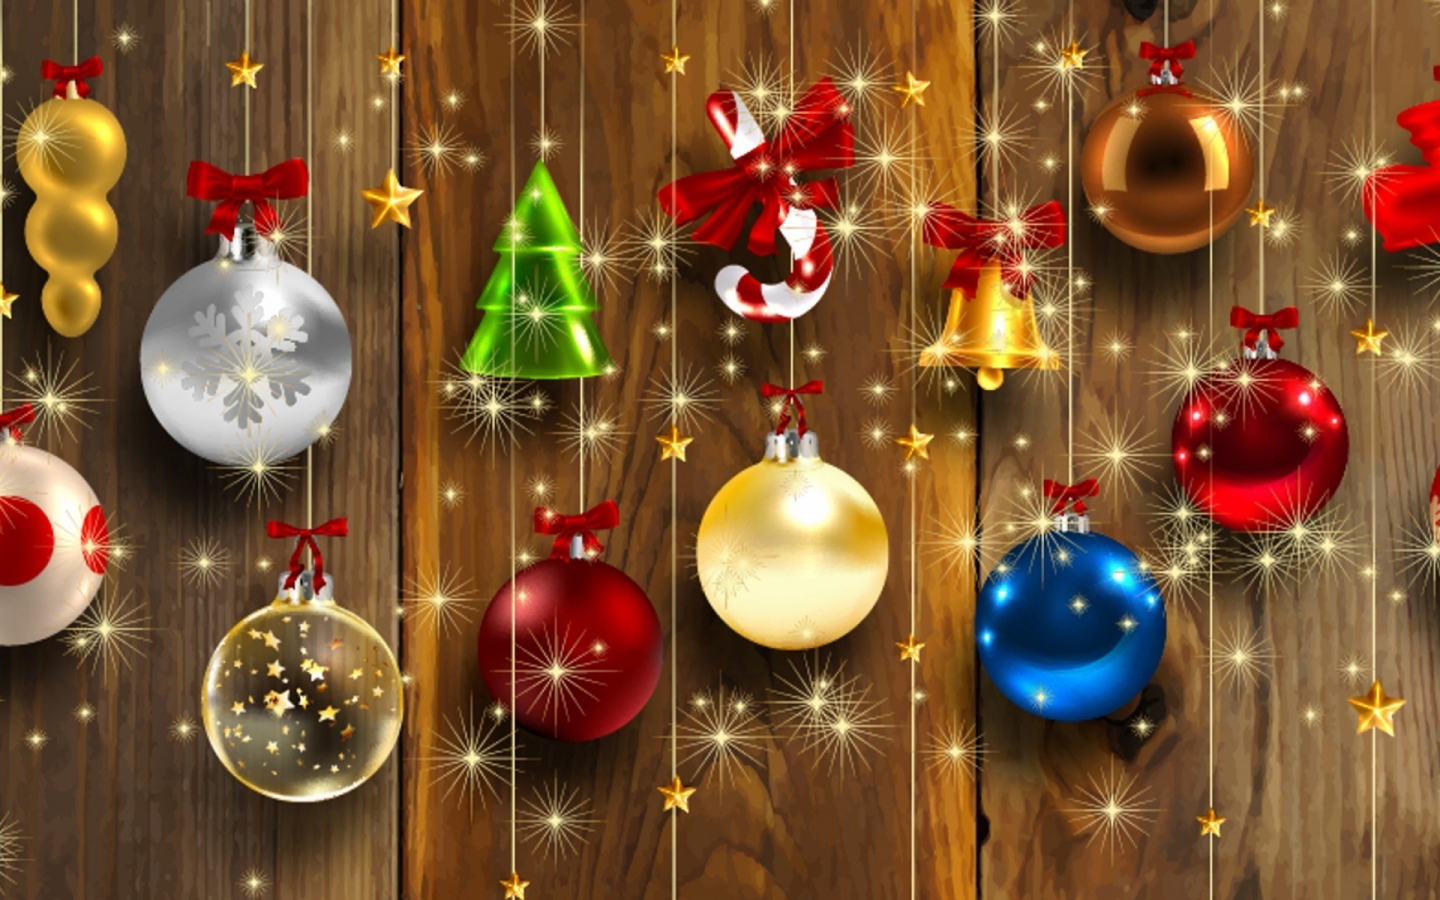 2013 Christmas Ornaments for 1440 x 900 widescreen resolution